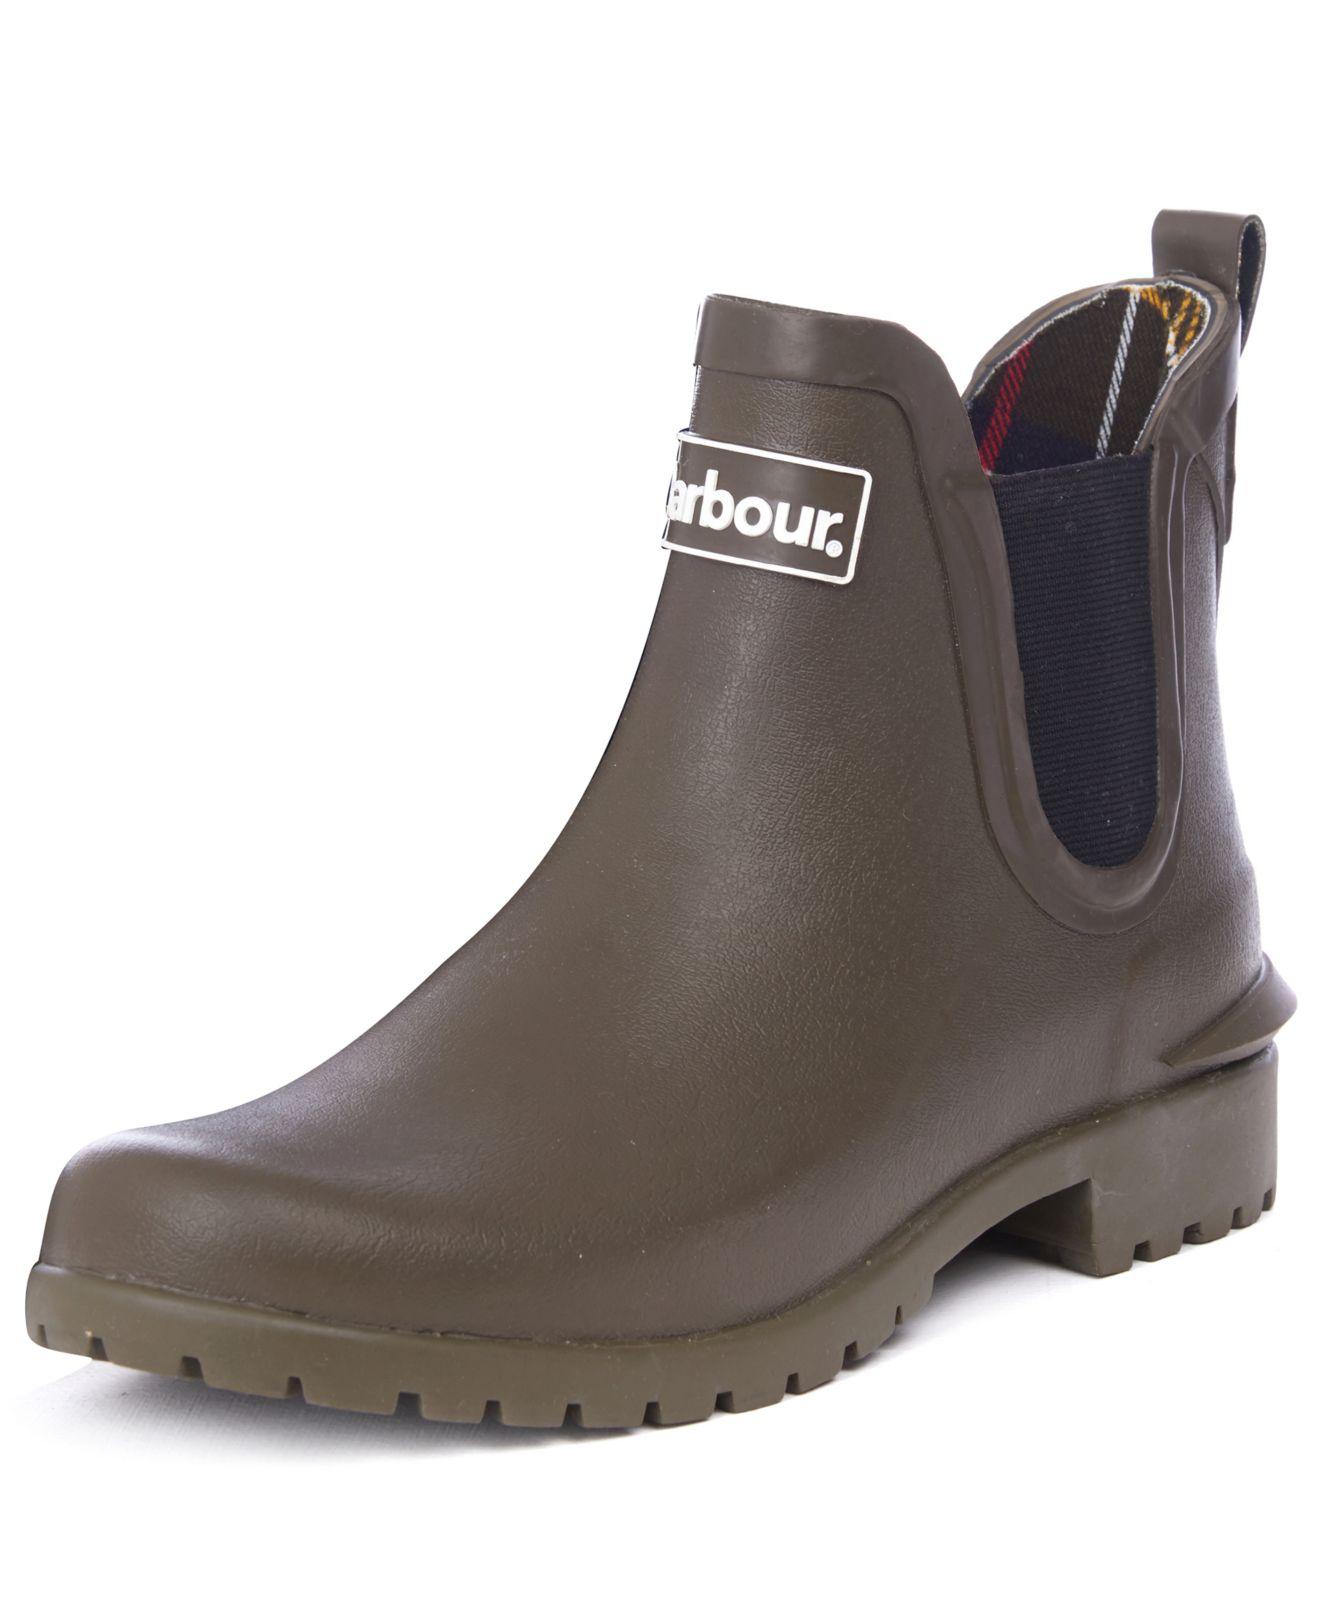 Barbour Rubber Wilton Wellington Rain Boots in Olive (Green) - Lyst